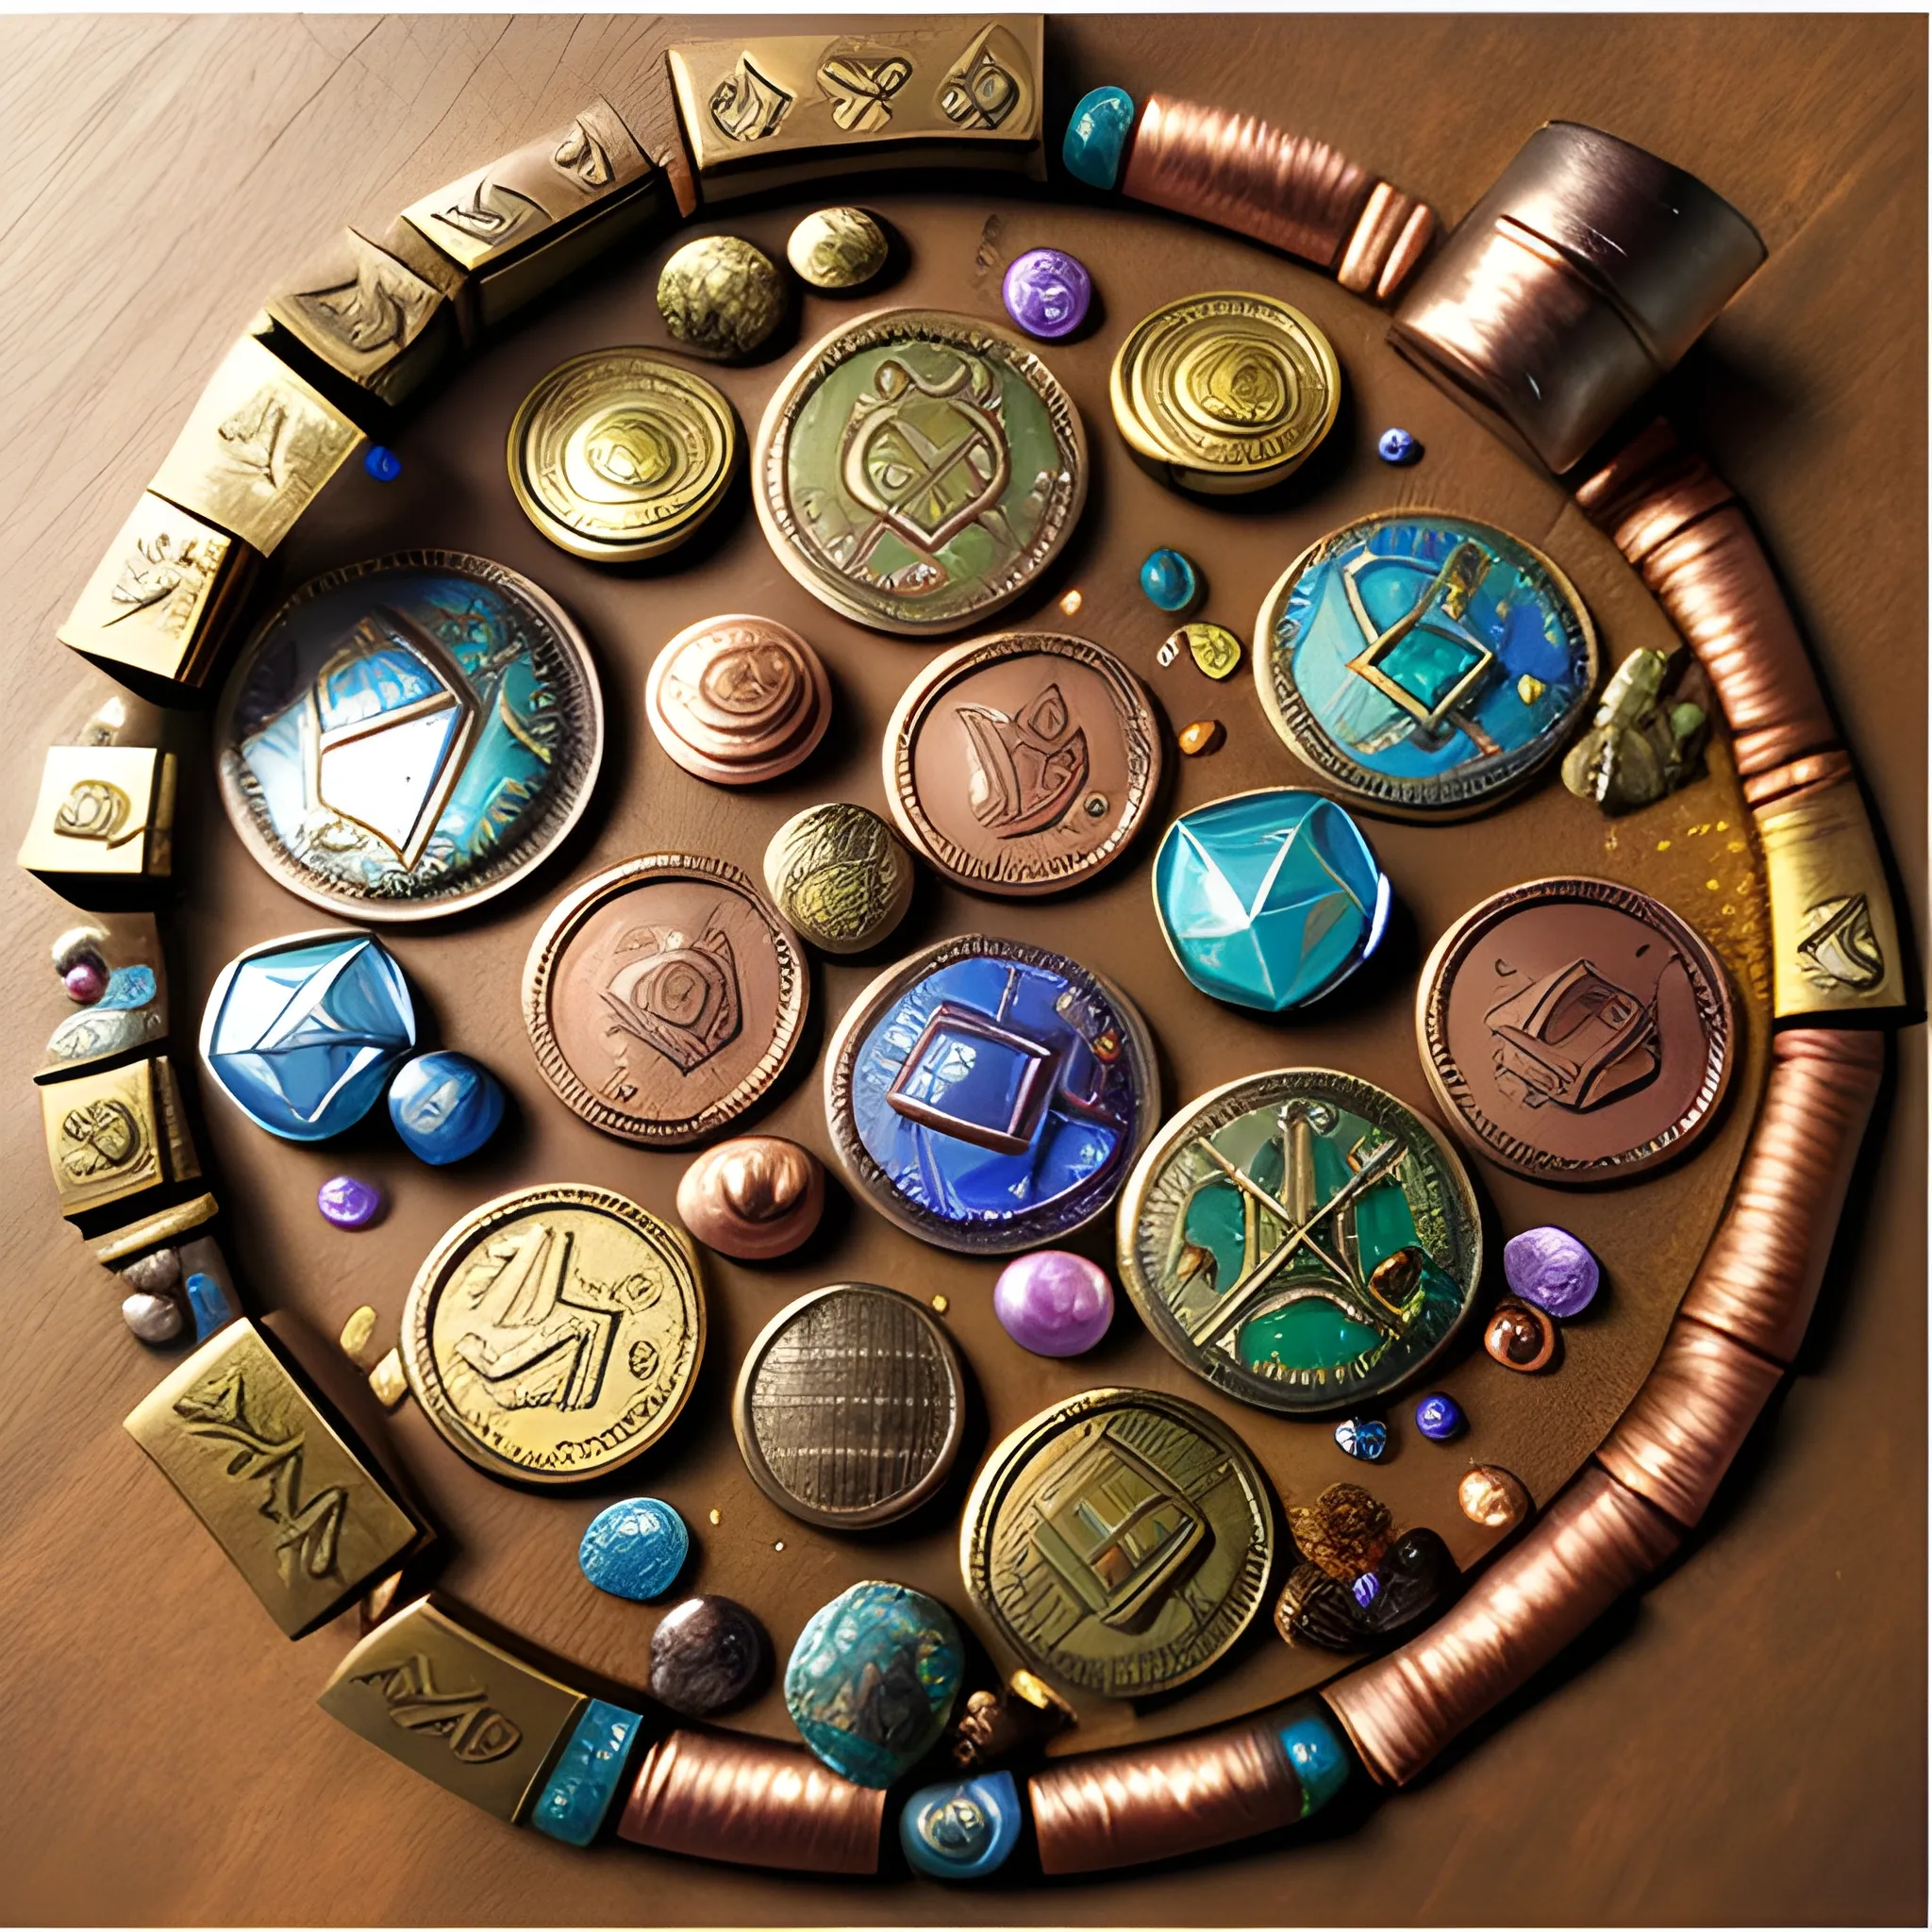 dnd high fantasy, coin piles, a mix of copper, tin, brass, and even painted wood, precious currency from a variety of countries, semiprecious gems, Oil Painting